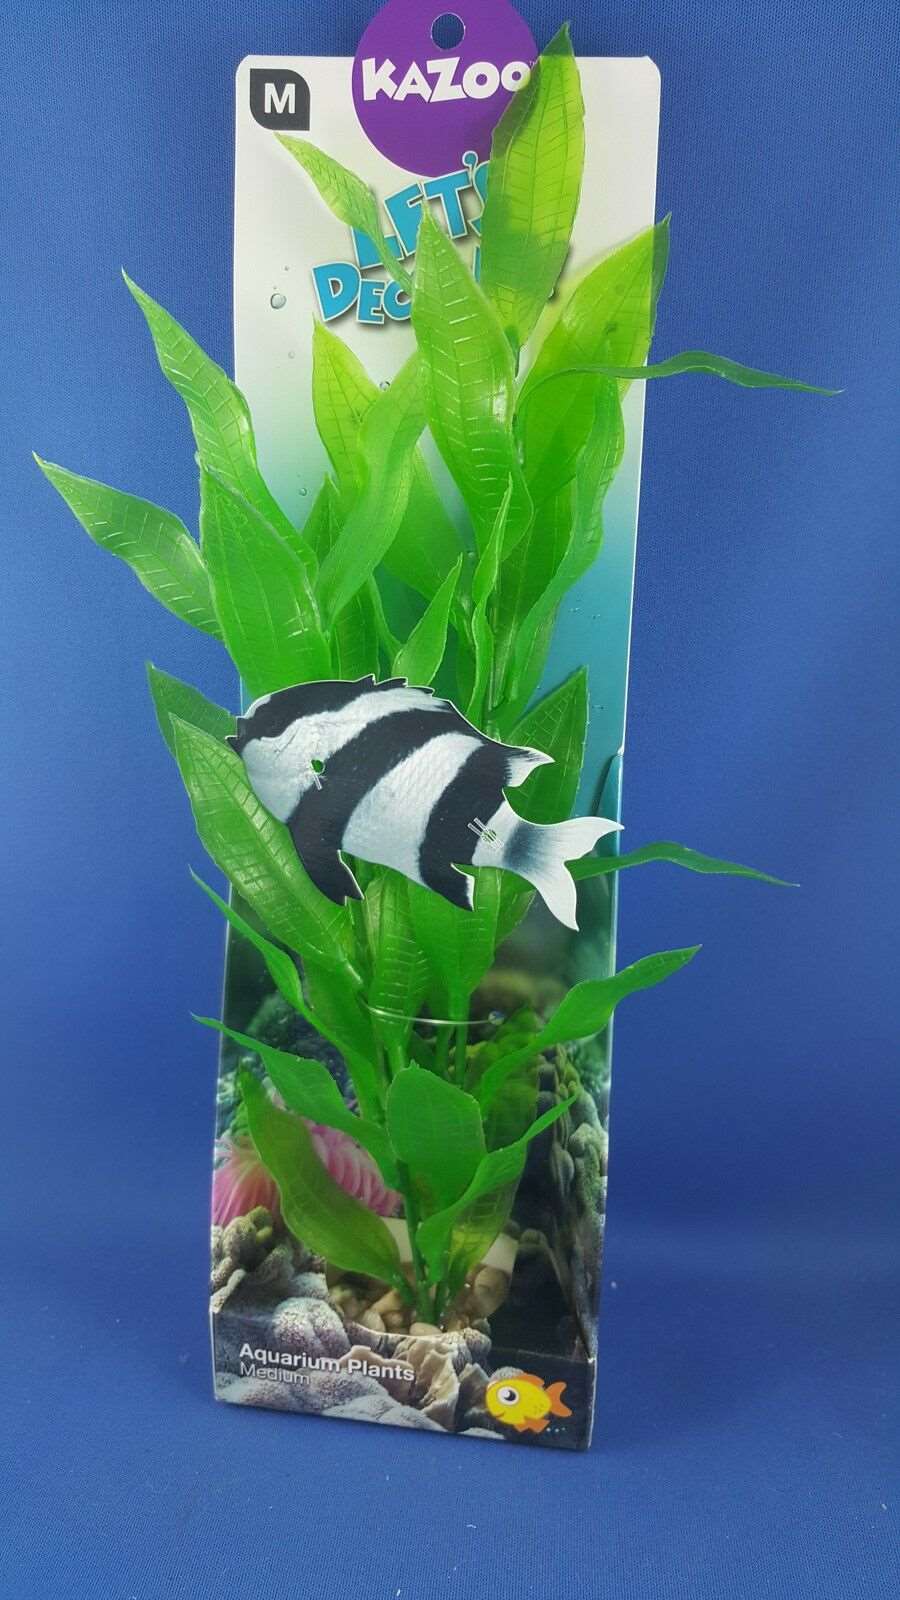 Kazoo aquarium plant, medium size with green leaves with solid pebble base